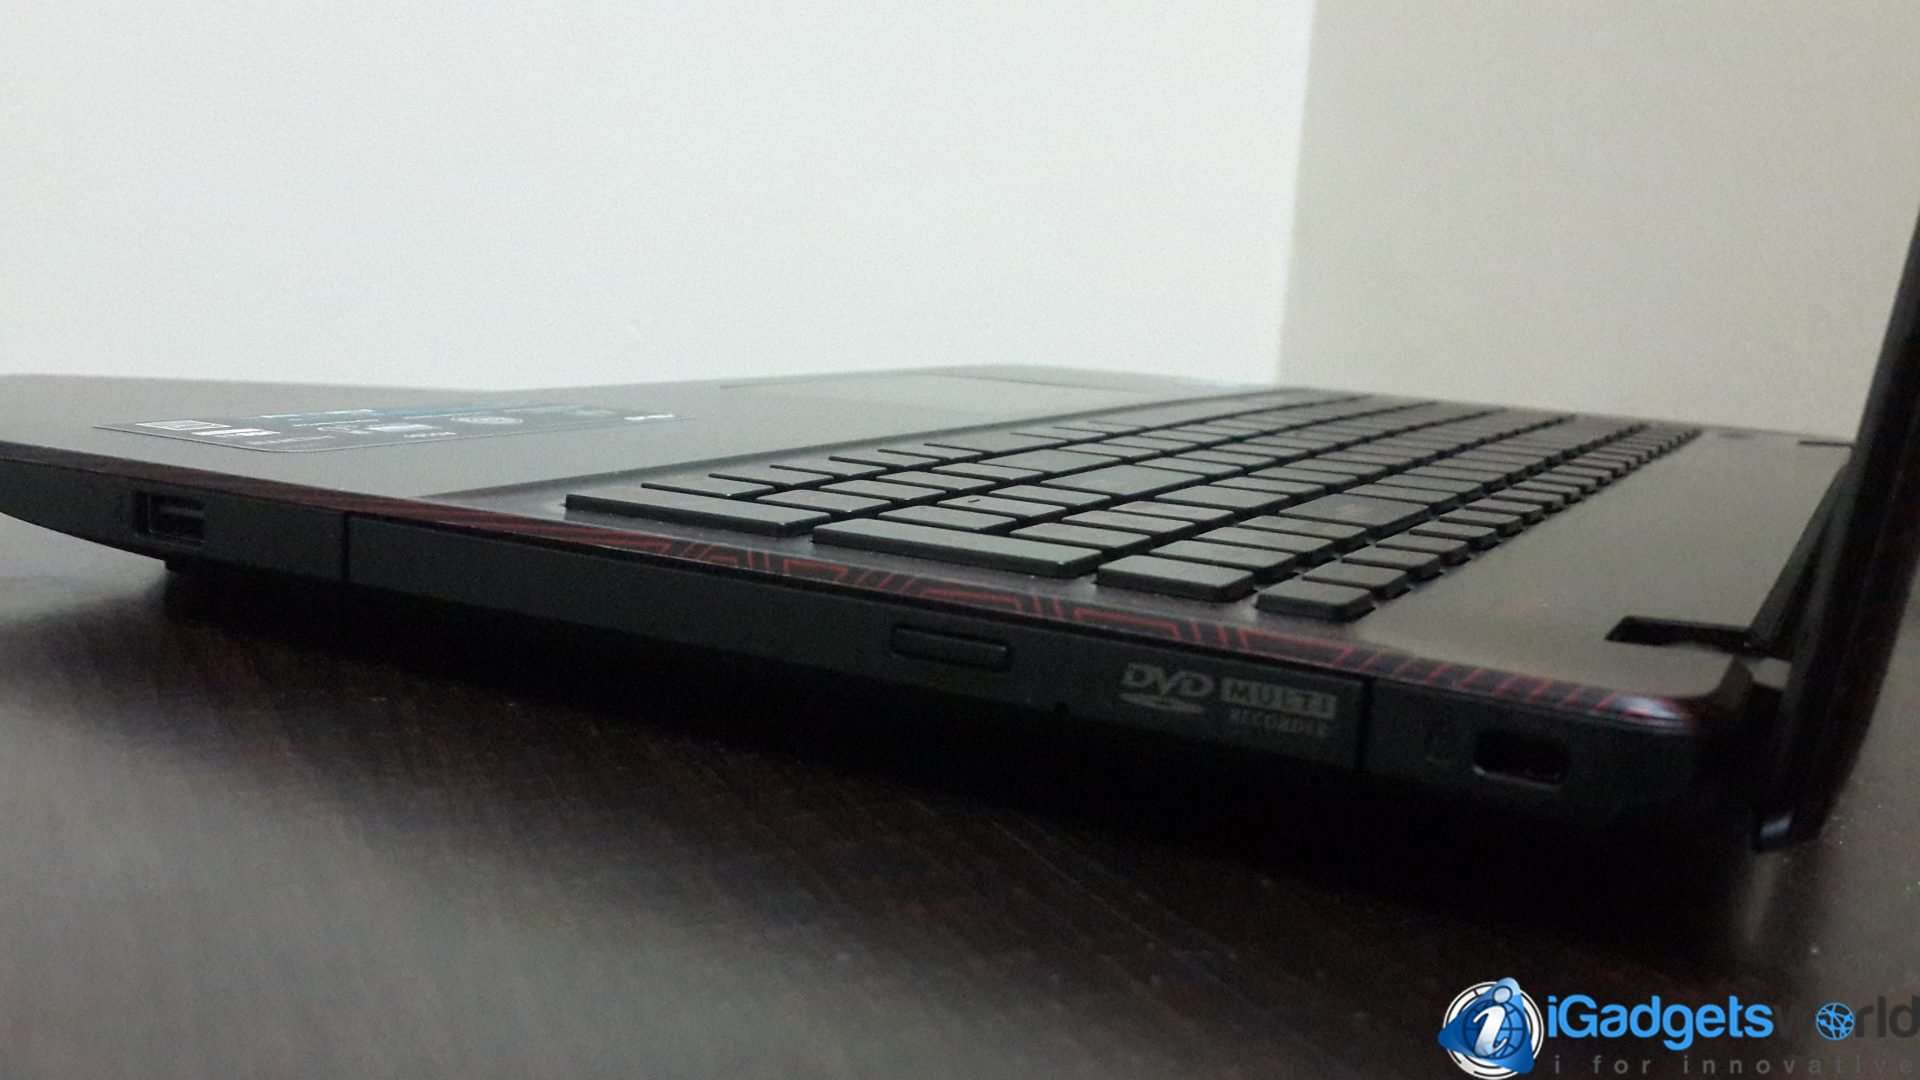 Asus R510J Review: A Slim Gaming Notebook Within the budget! - 7